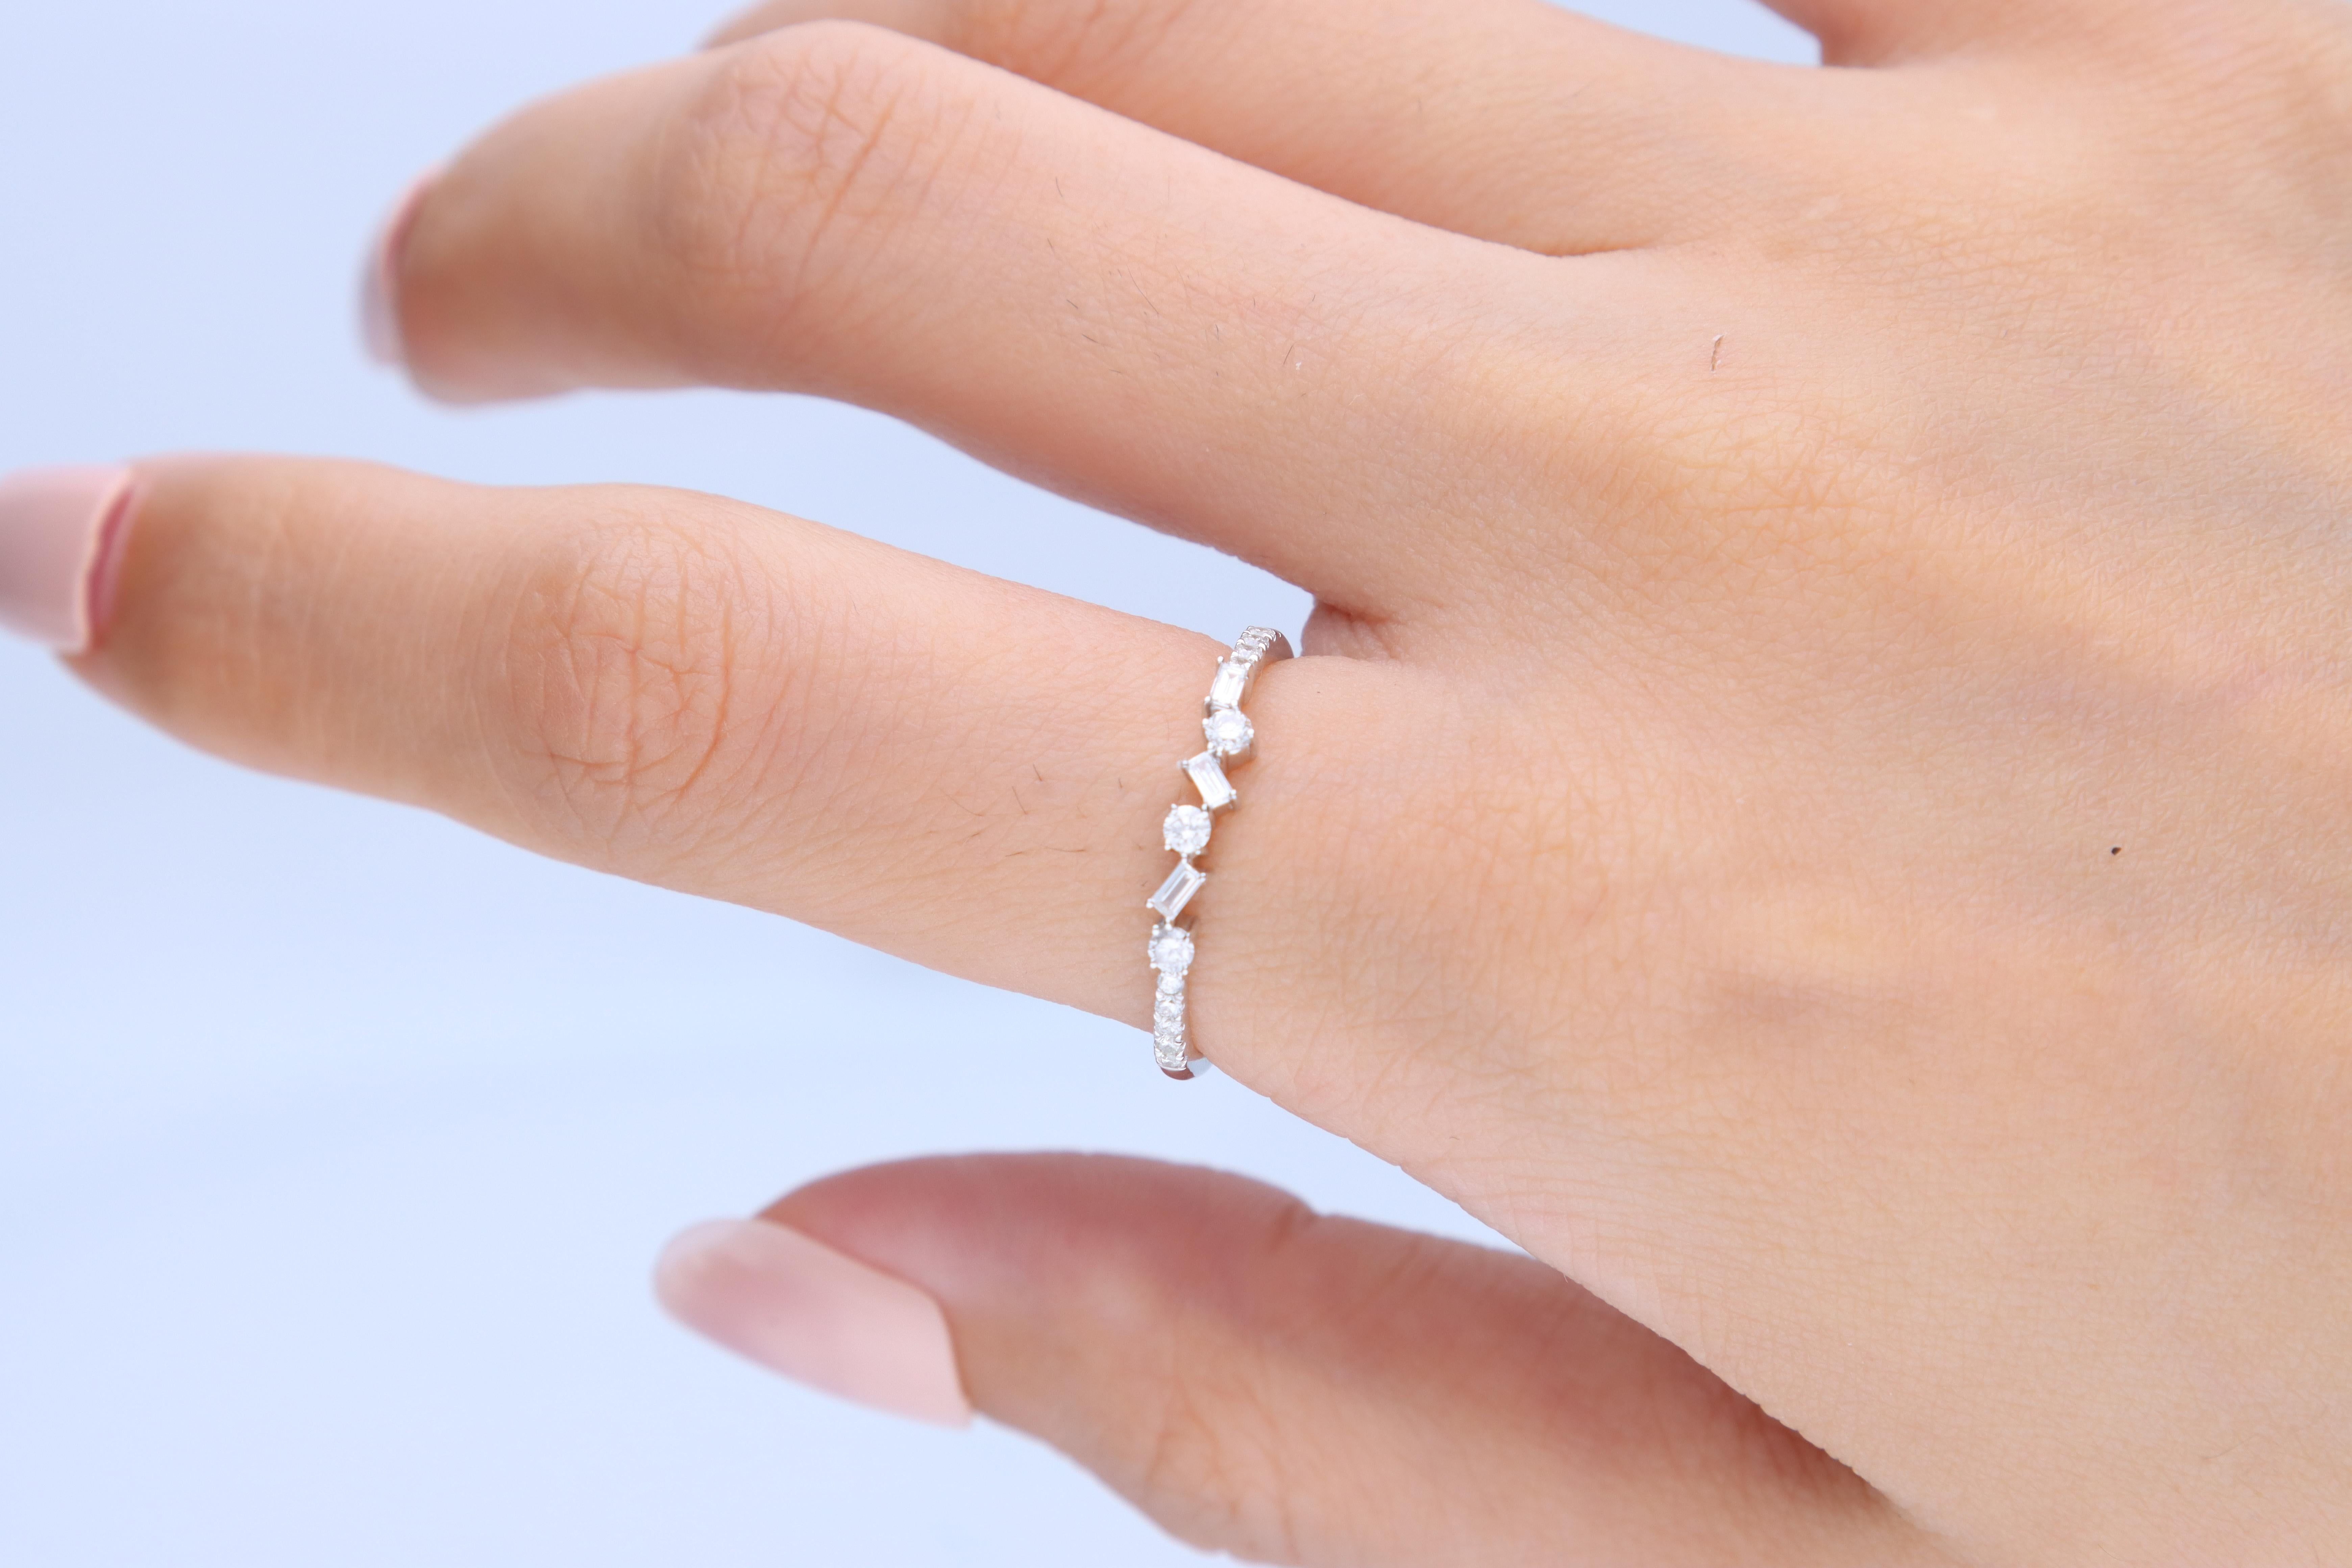 Stunning, timeless and classy eternity Unique ring. Decorate yourself in luxury with this Gin & Grace ring. The 14k White Gold jewelry boasts Round-Cut Diamond (13 pcs) 0.18 Carat, Baguette-cut Diamond (3 pcs) 0.06 carat accent stones for a lovely